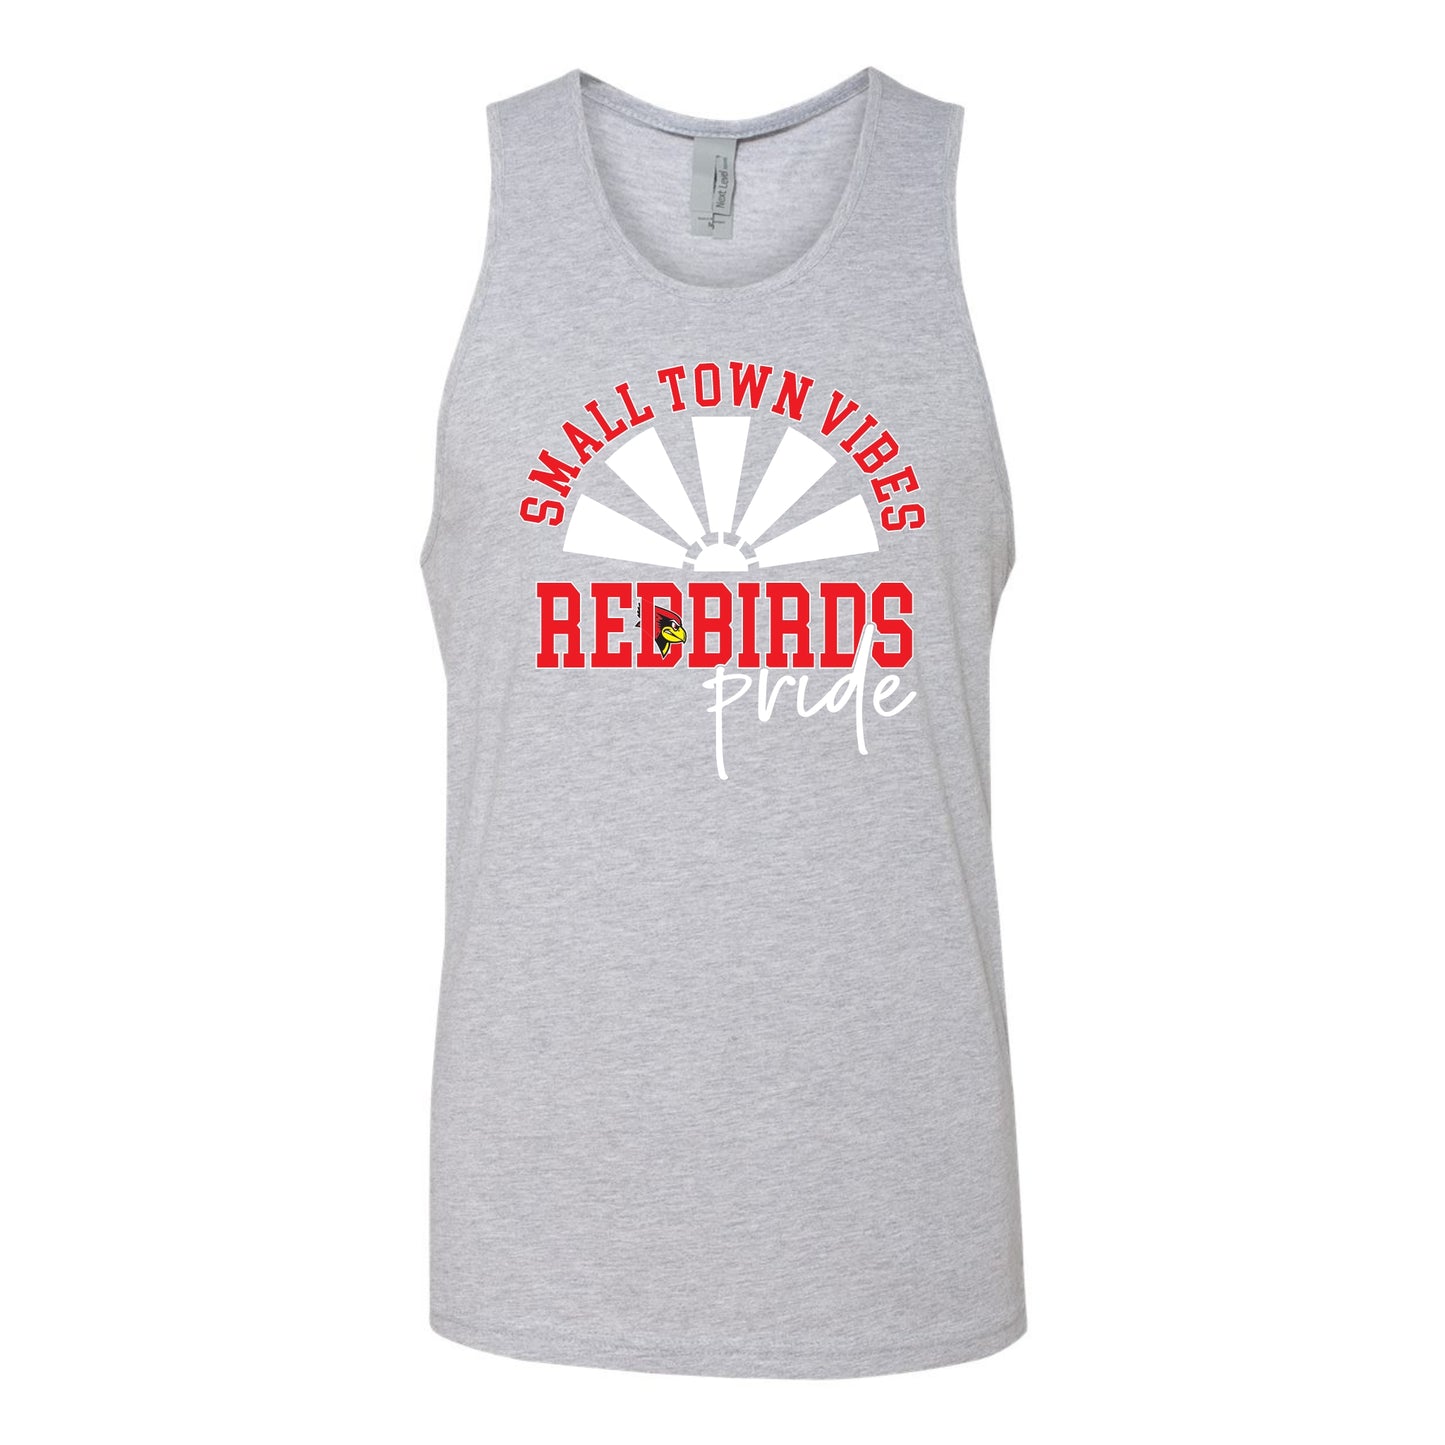 Small Town Vibes Men's Tank